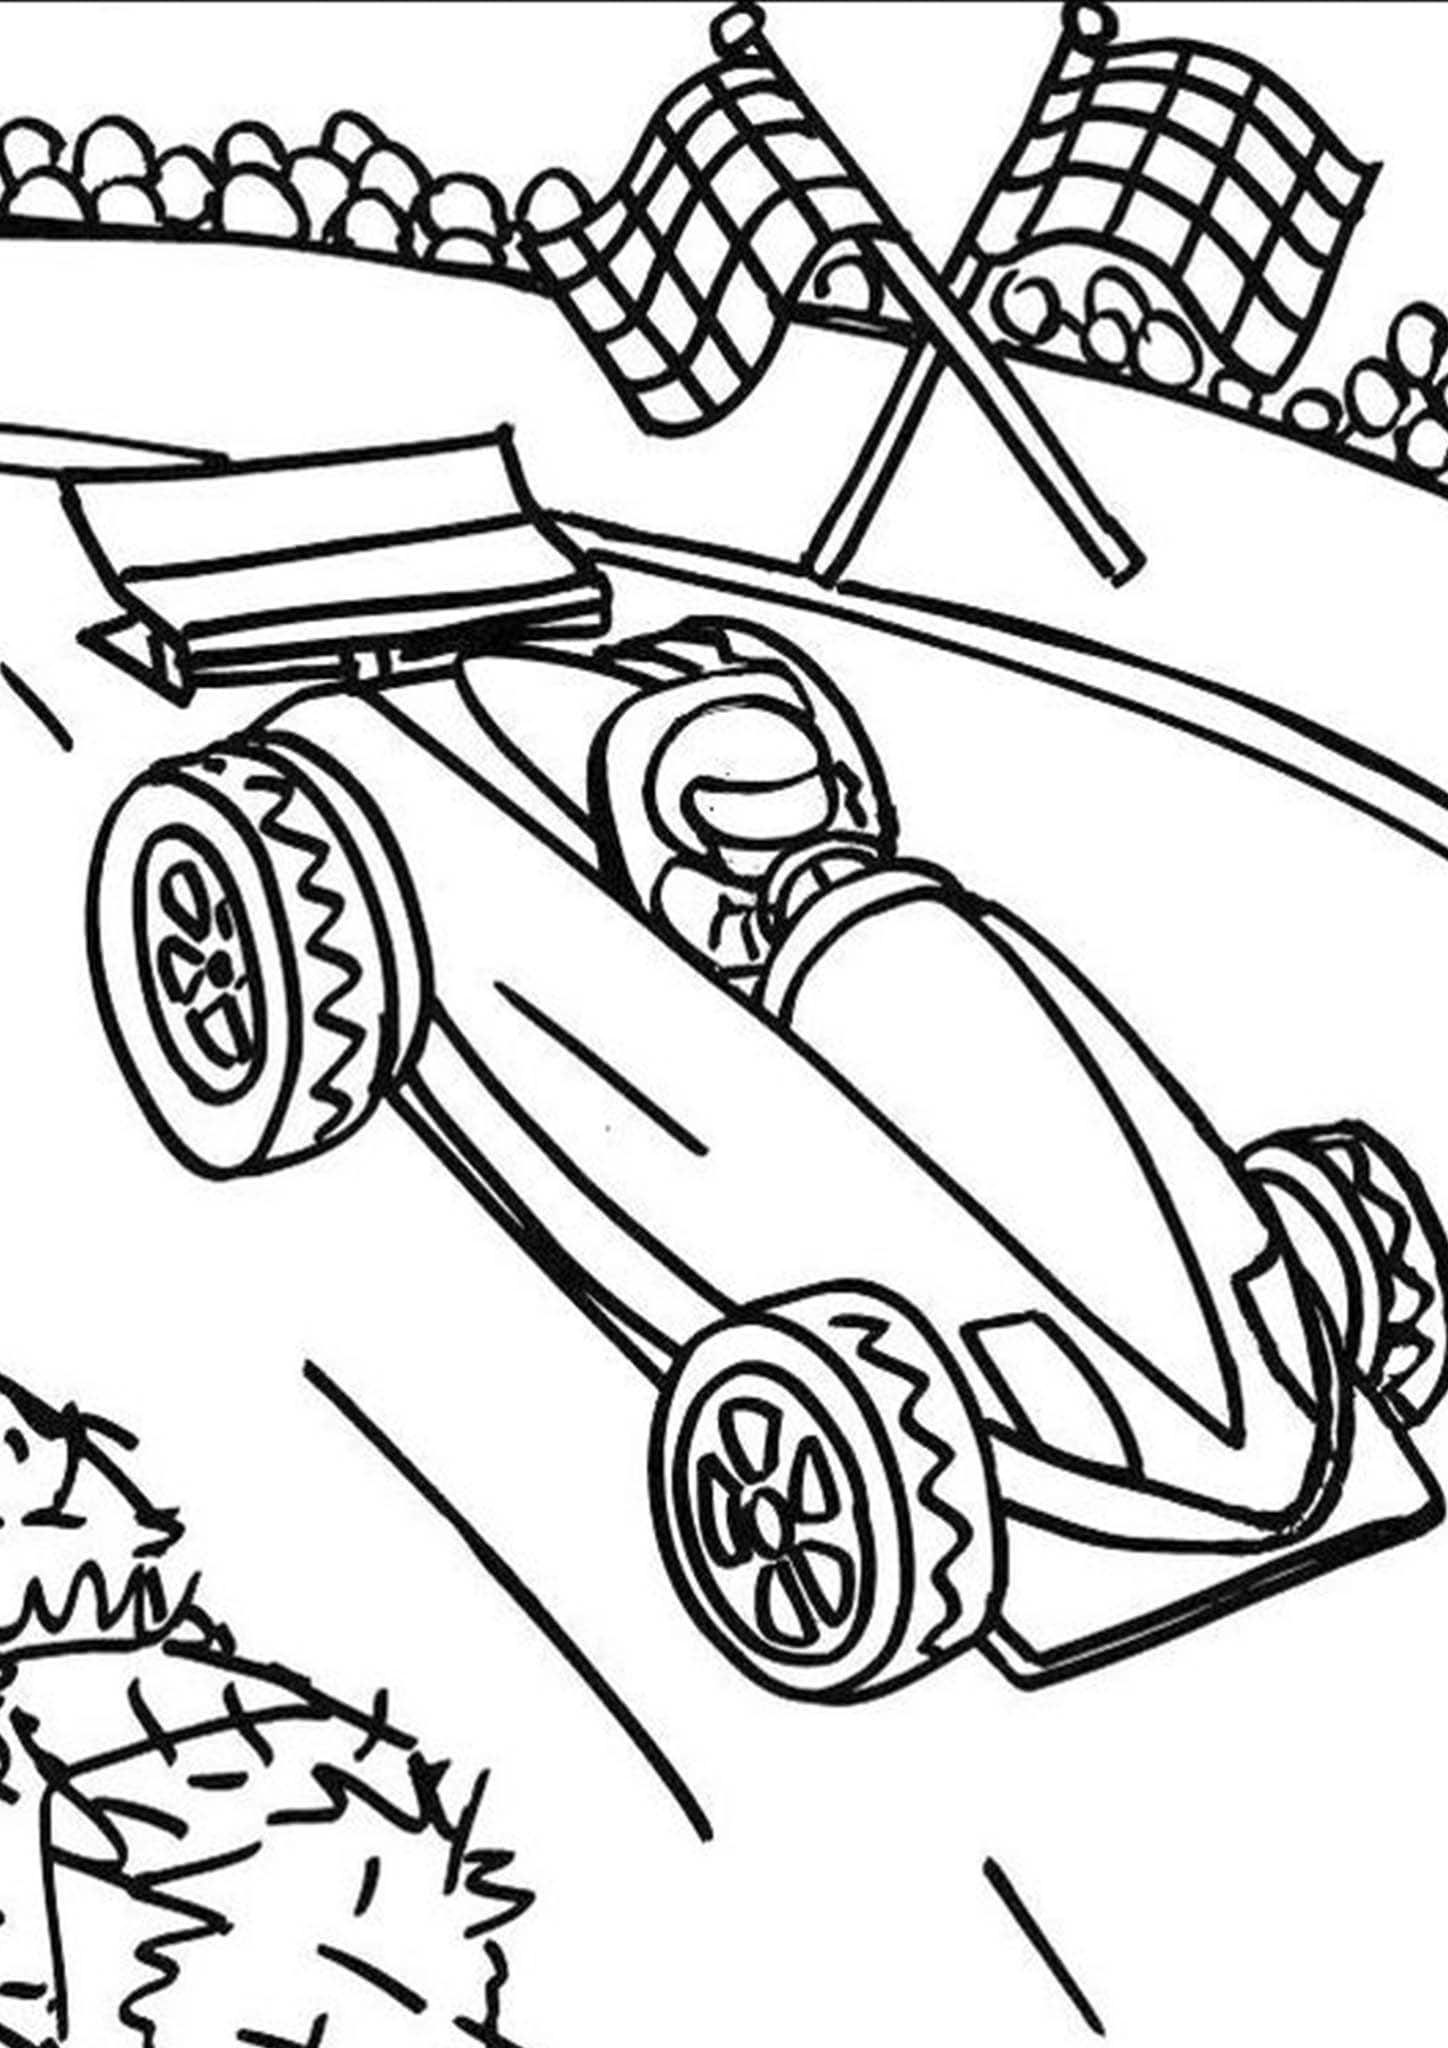 Free easy to print race car coloring pages race car coloring pages cars coloring pages coloring pages